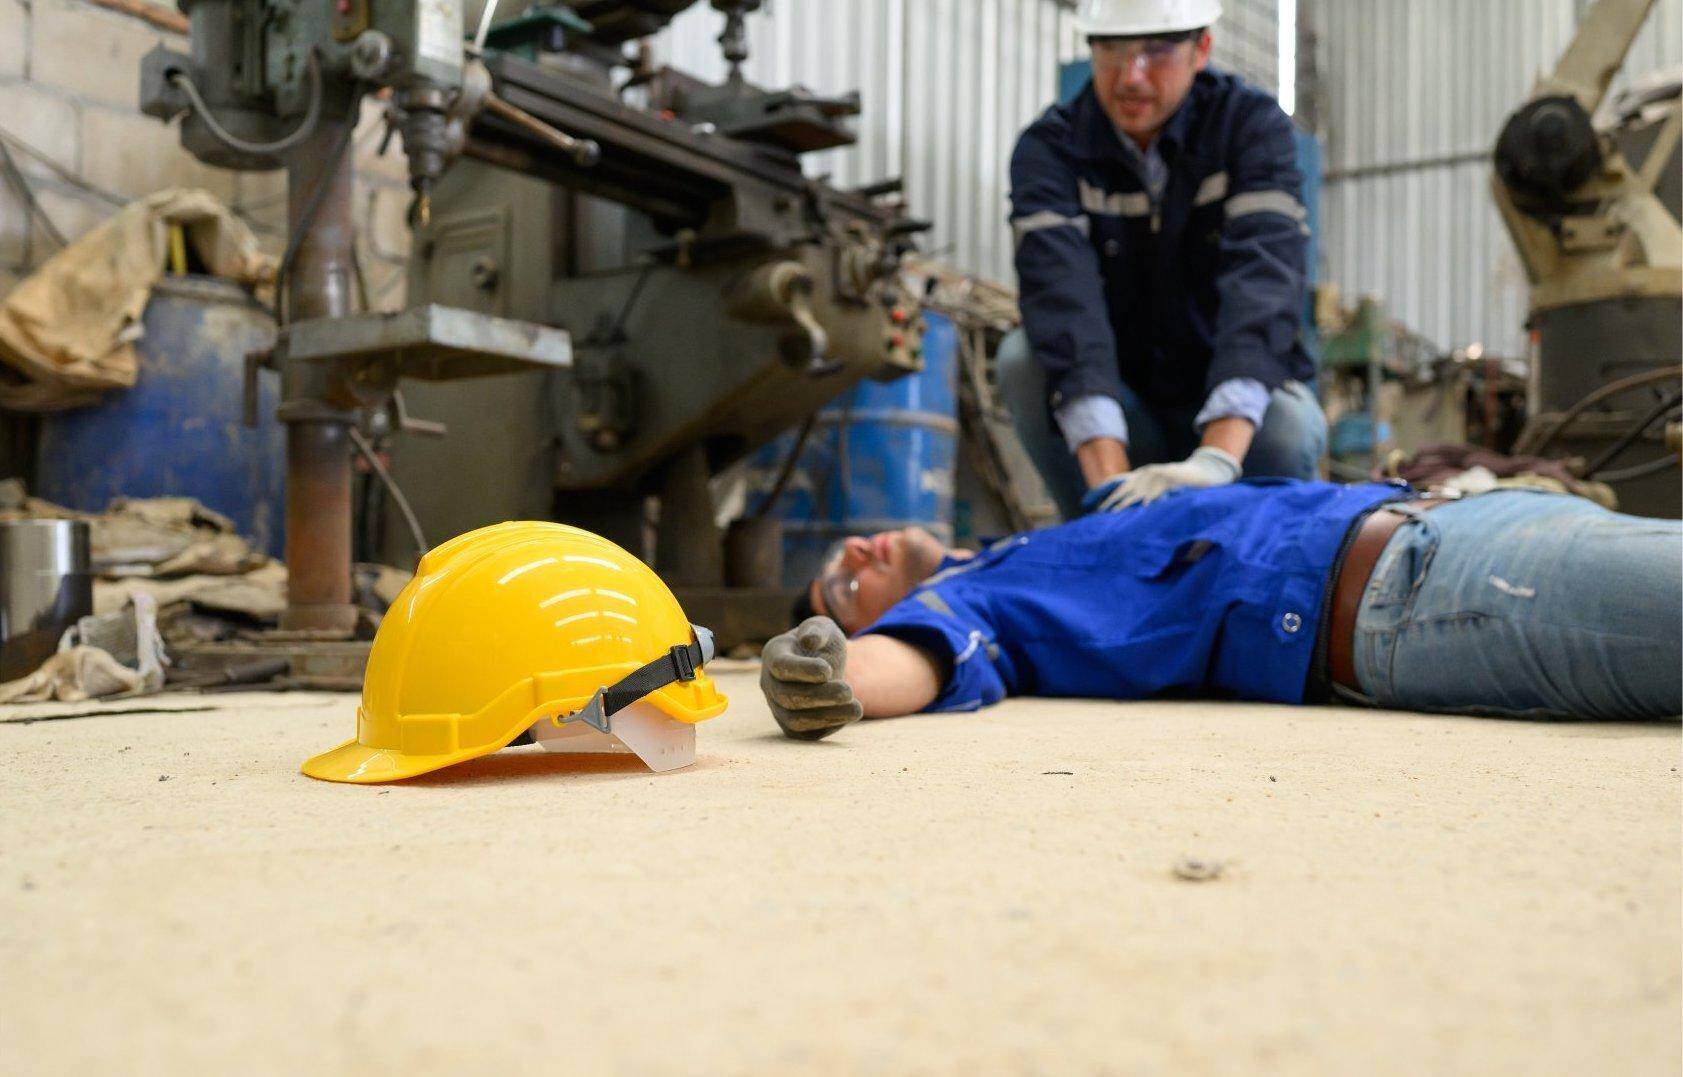 An unconscious man who has been injured on the job who will file for workers compensation in Monroe, Georgia